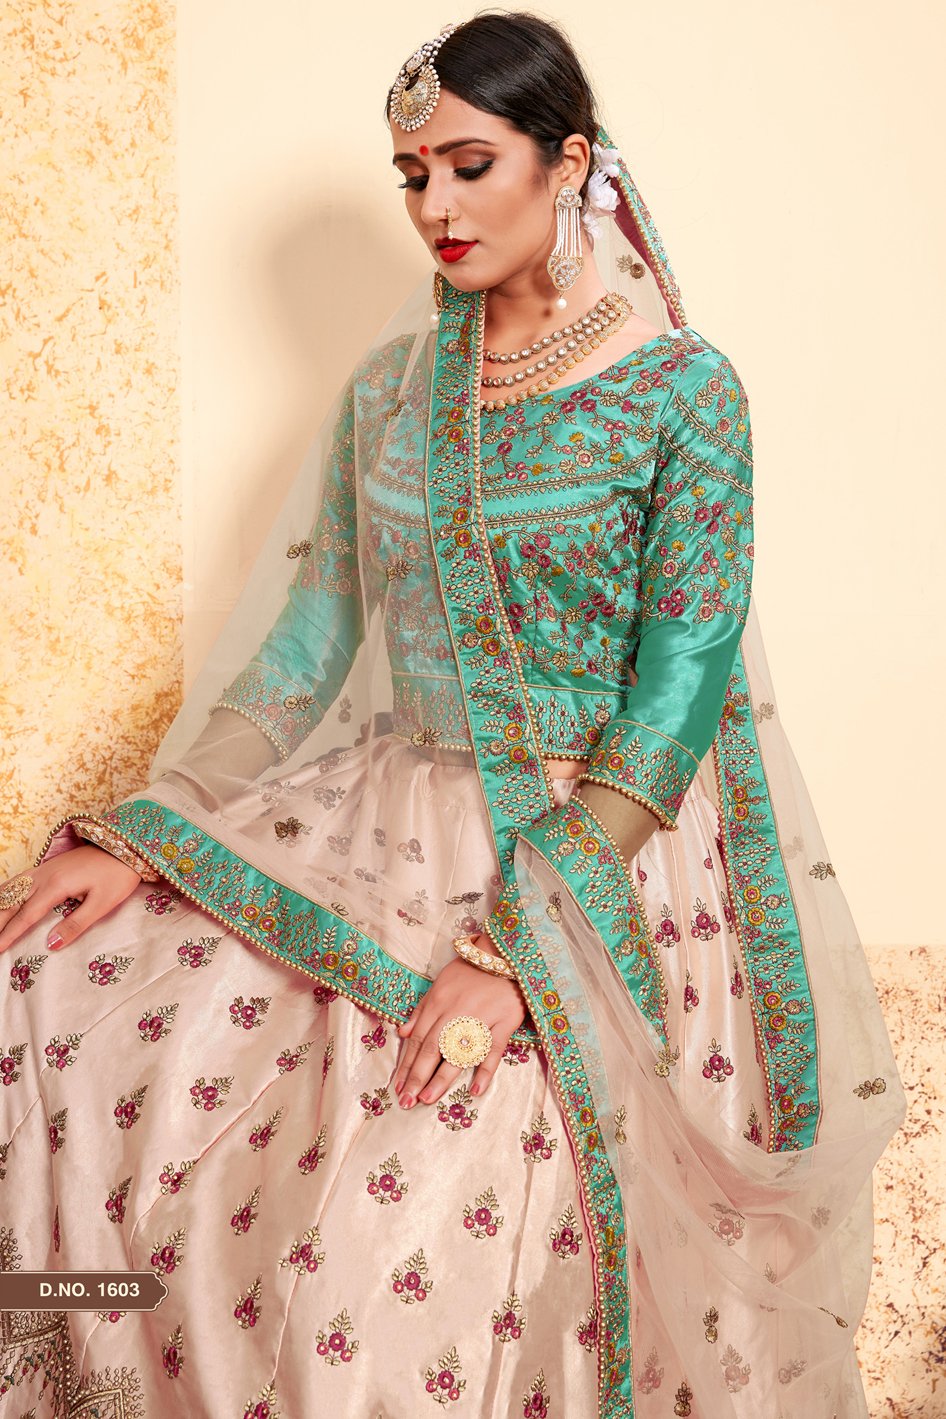 ZARI AND GLITTER SEQUINS EMBROIDERY – Sudarshansarees